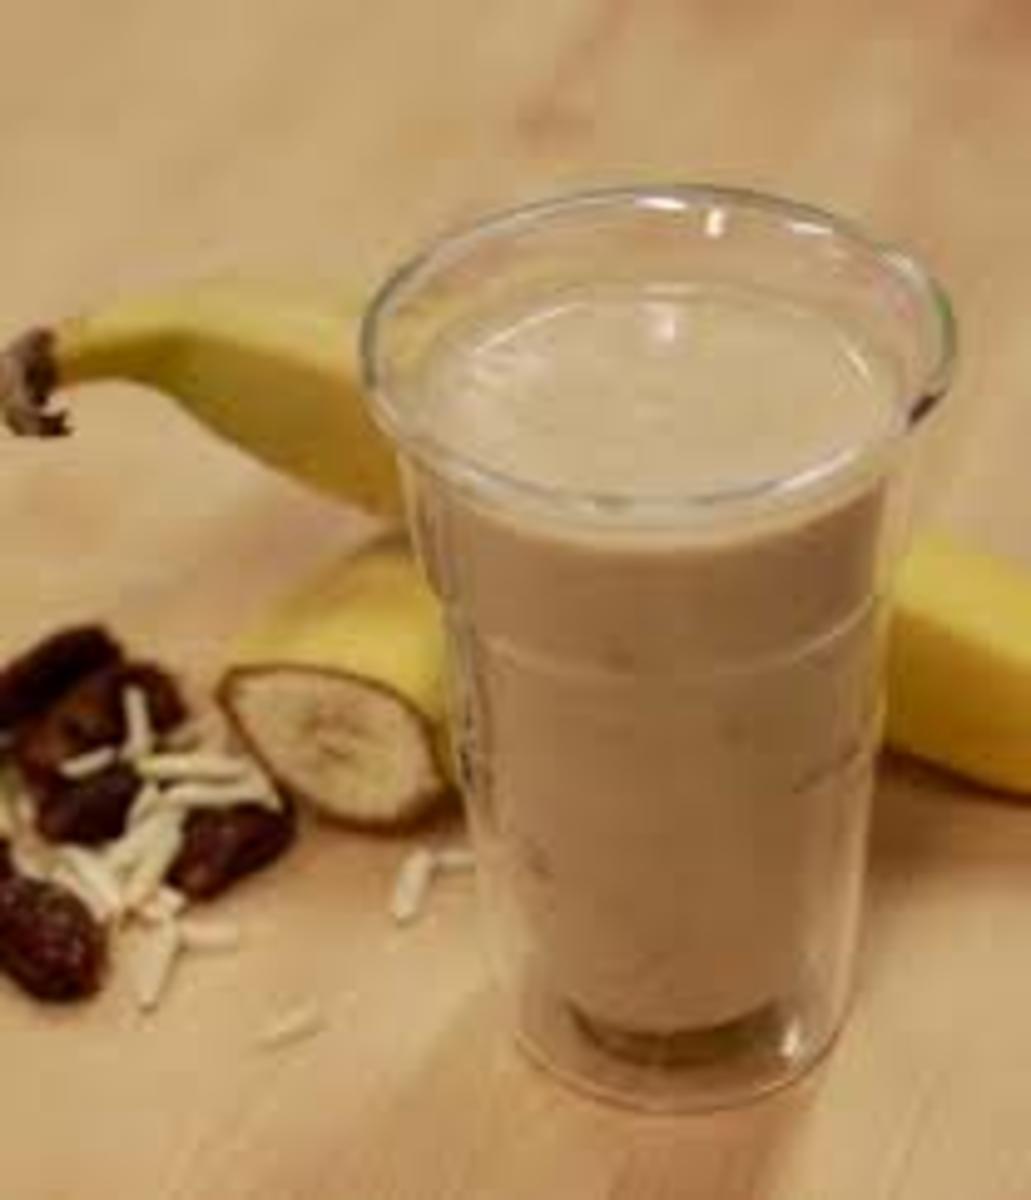 Date Banana Smoothies - Try at Your Home